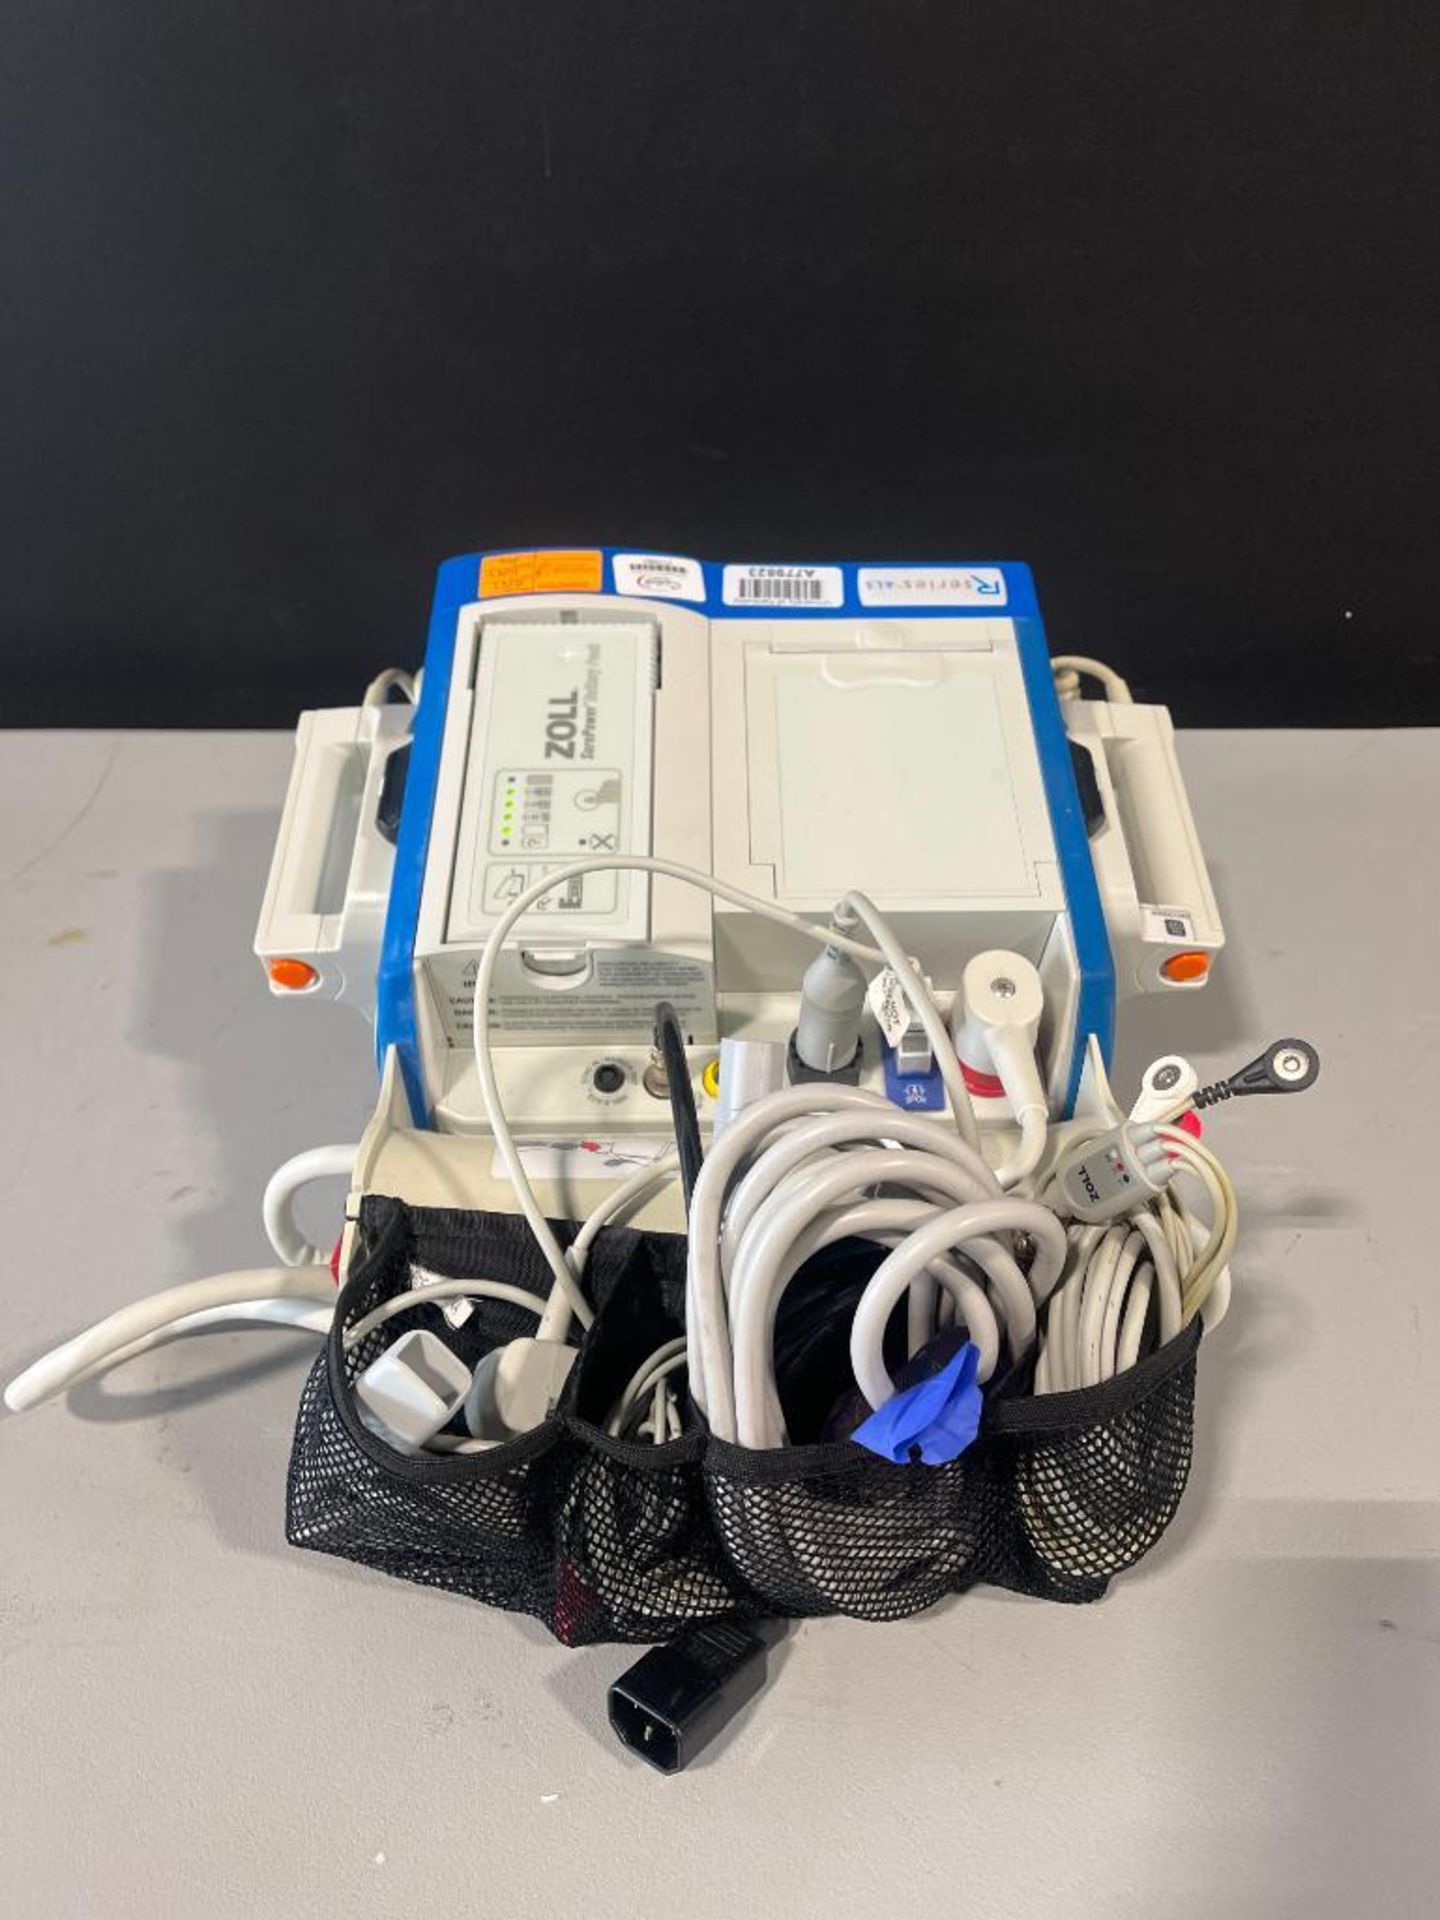 ZOLL R-SERIES ALS DEFIBRILLATOR WITH PACING, ECG,CO2,, SPO2, NIBP, ANALYZE, PADDLES, BATTERY - Image 3 of 4